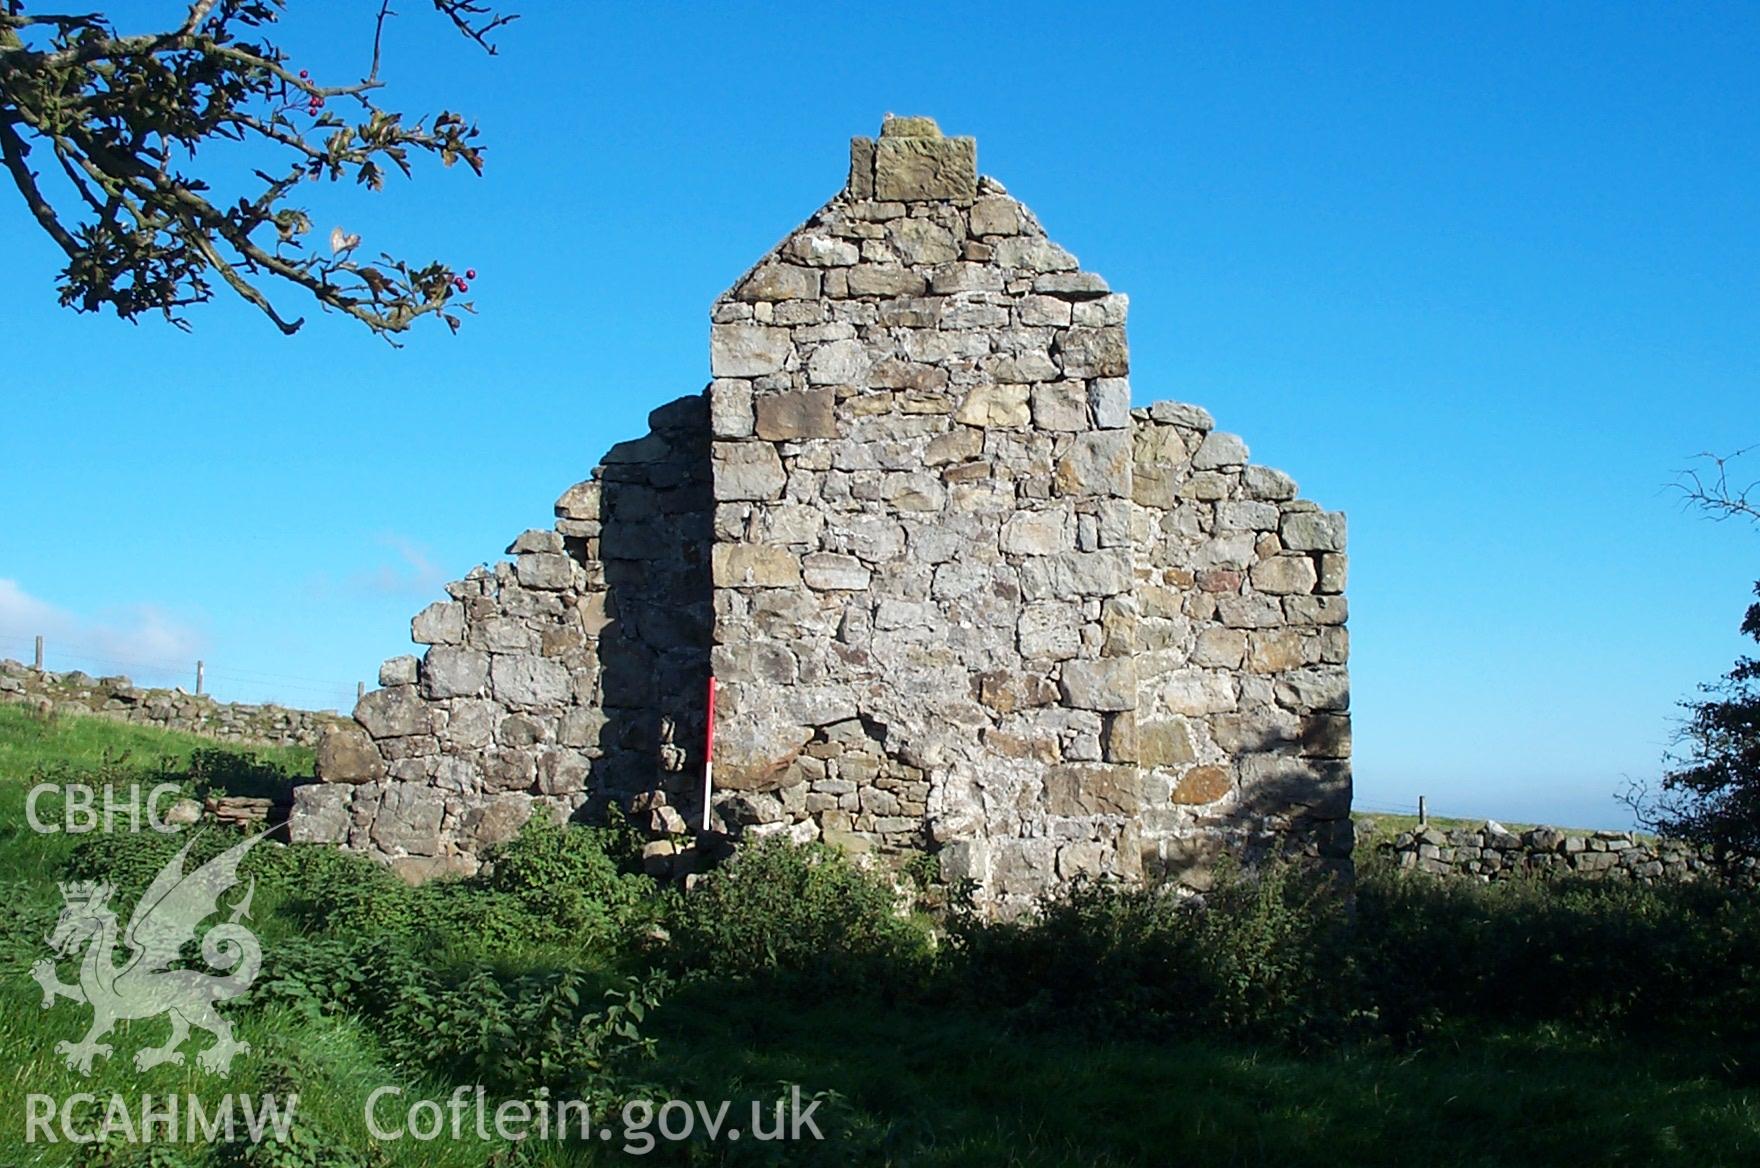 Digital photograph of Hillside Farm 'Shepherds Cottage' taken on 18/10/2002 by Oxford Archaeology North during the Ruabon Mountain Upland Survey